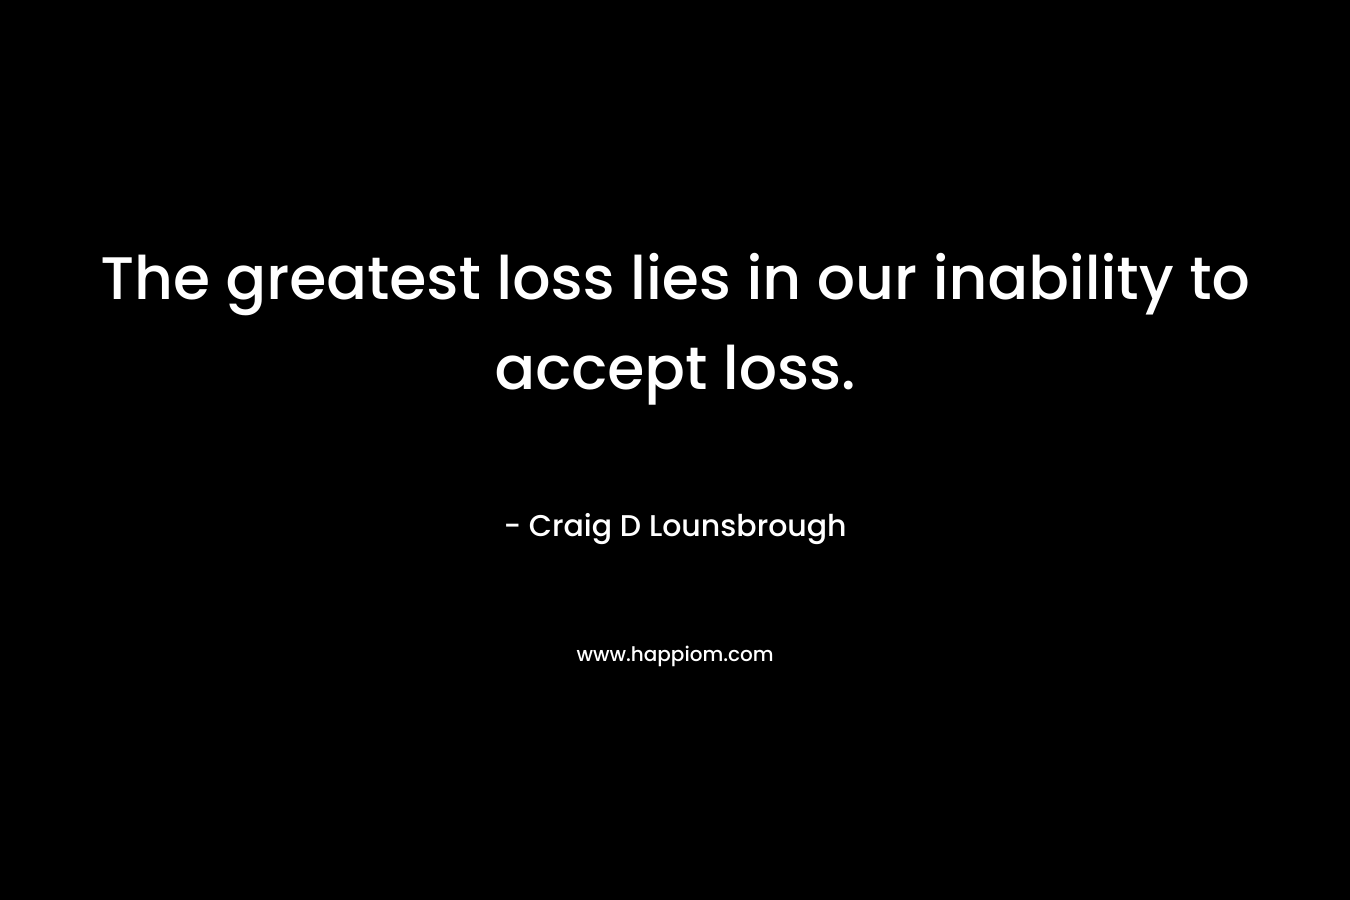 The greatest loss lies in our inability to accept loss.